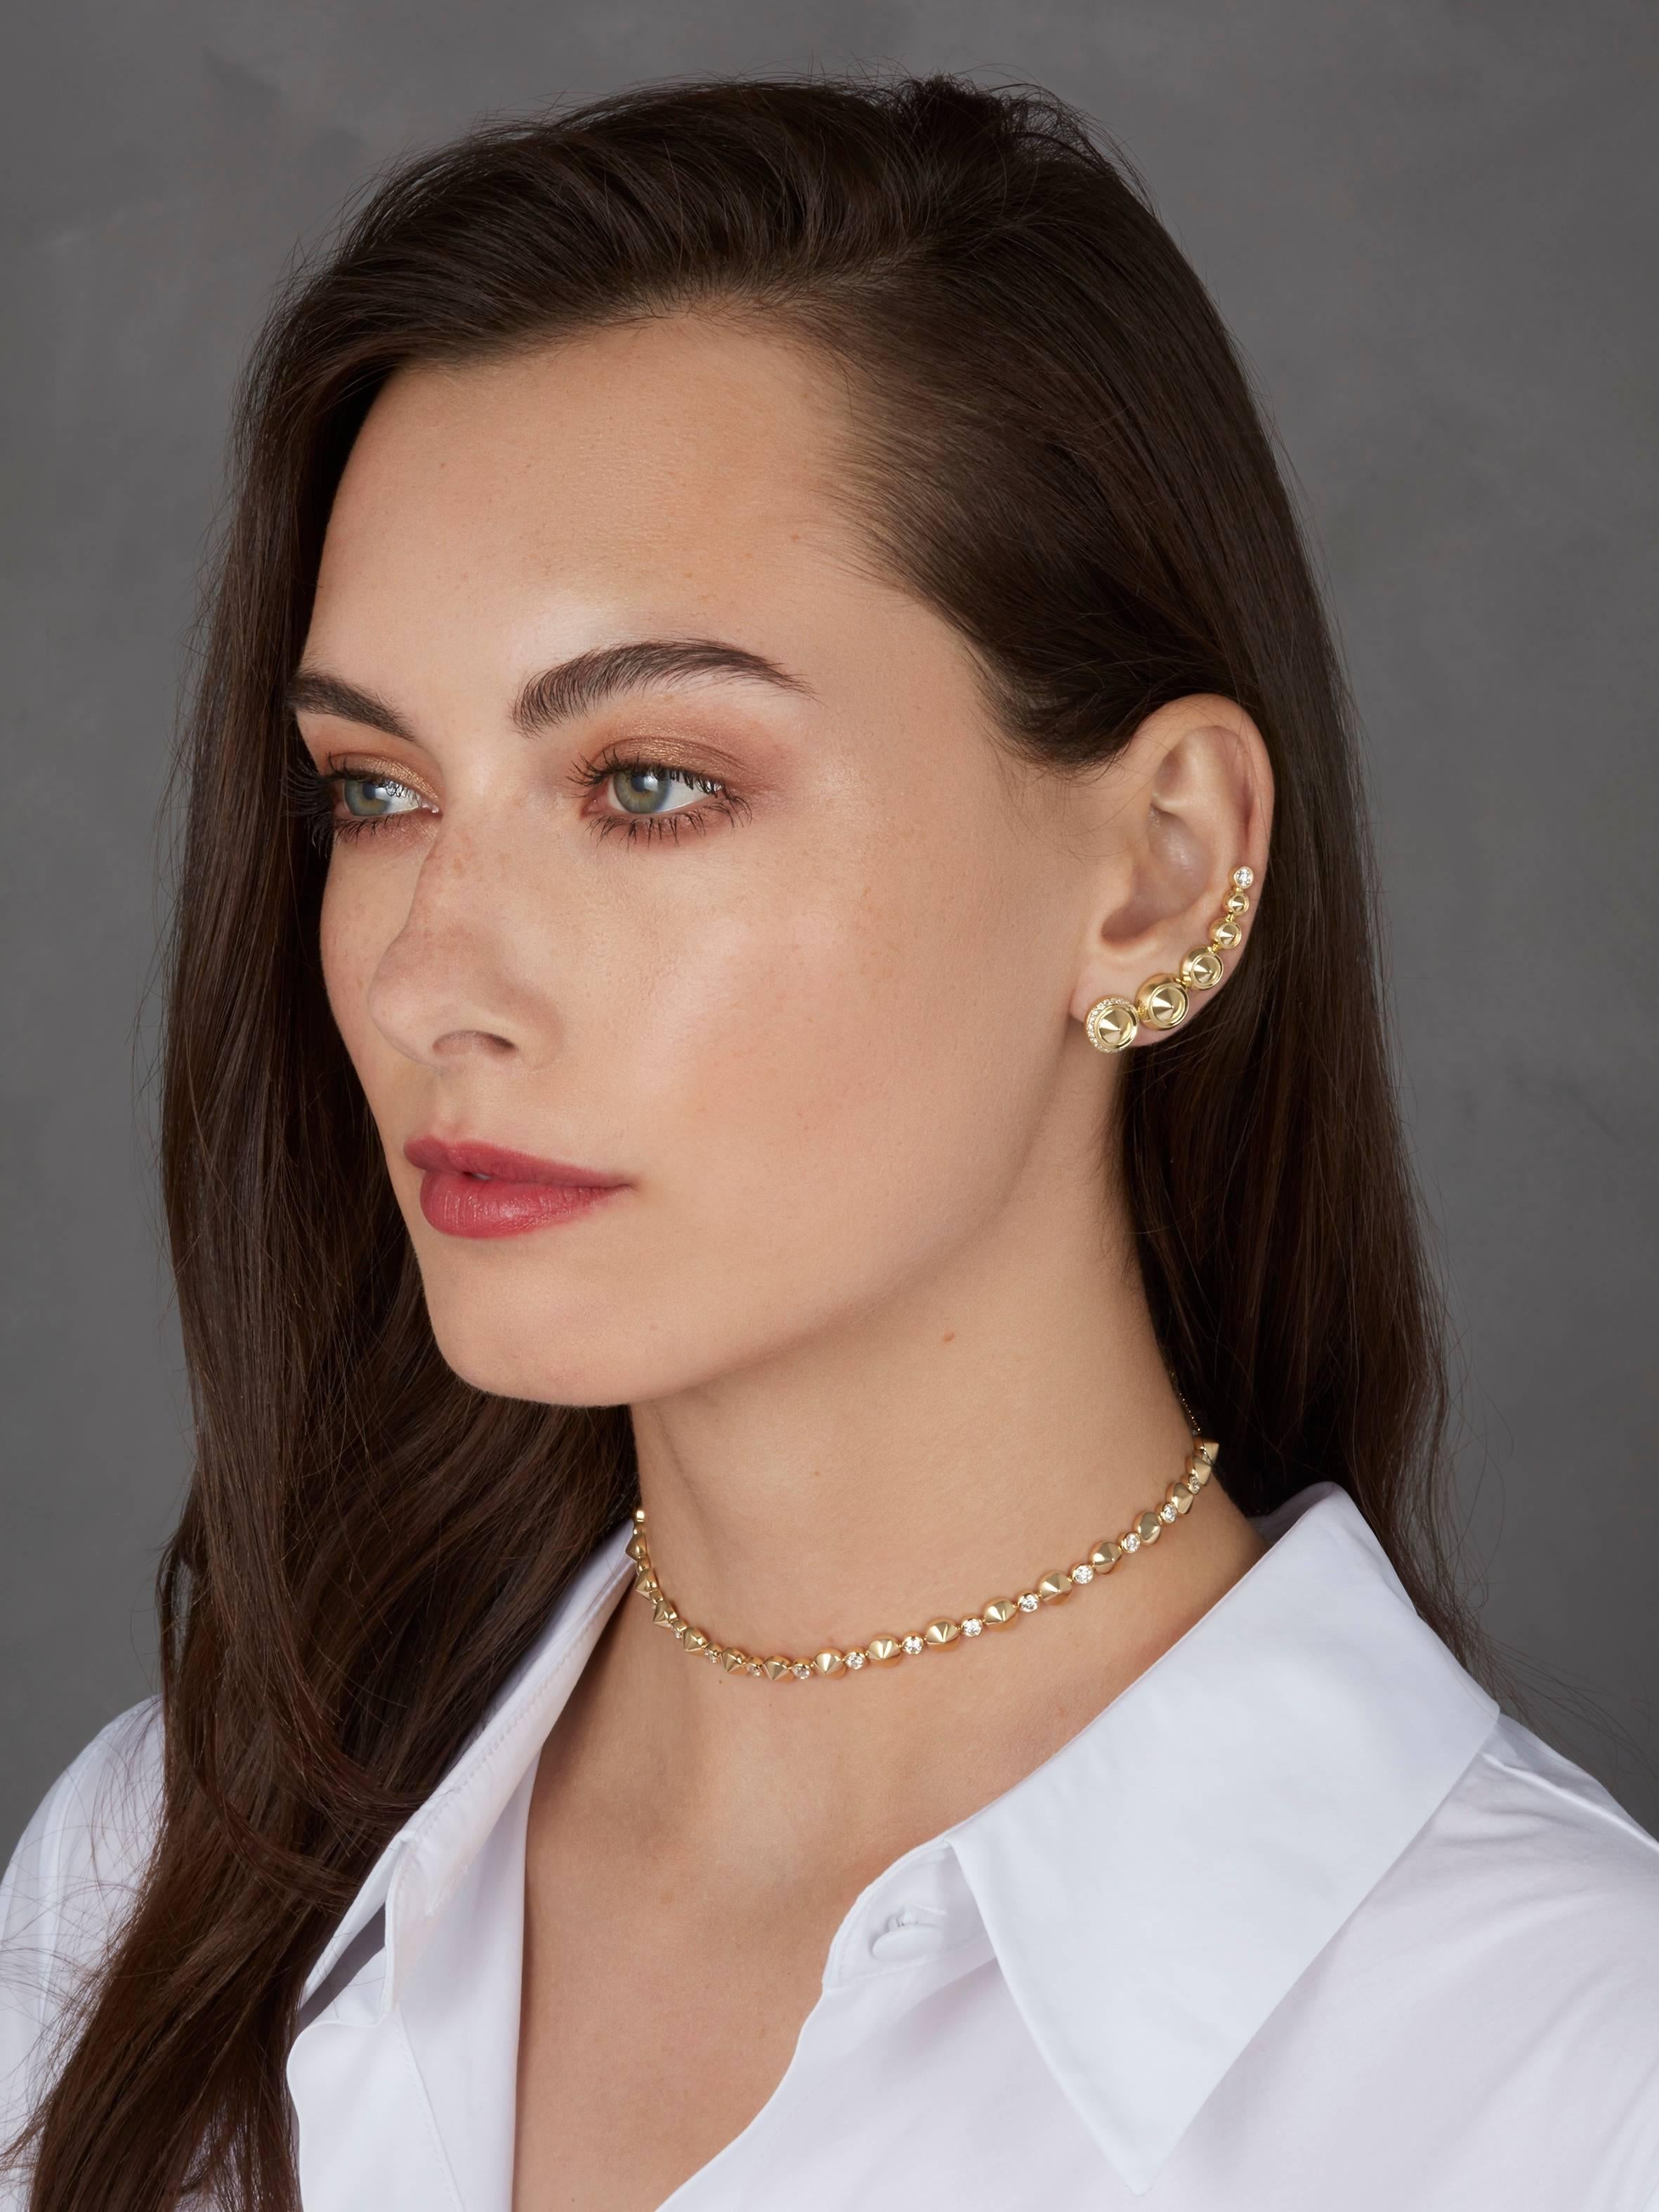 Strikingly feminine and elegant, the new Sahara collection from VANLELES is crafted entirely from fair trade gold and ethically sourced diamonds. Inspired by rooftop nights under the Sahara sky, this collection draws its unique design from